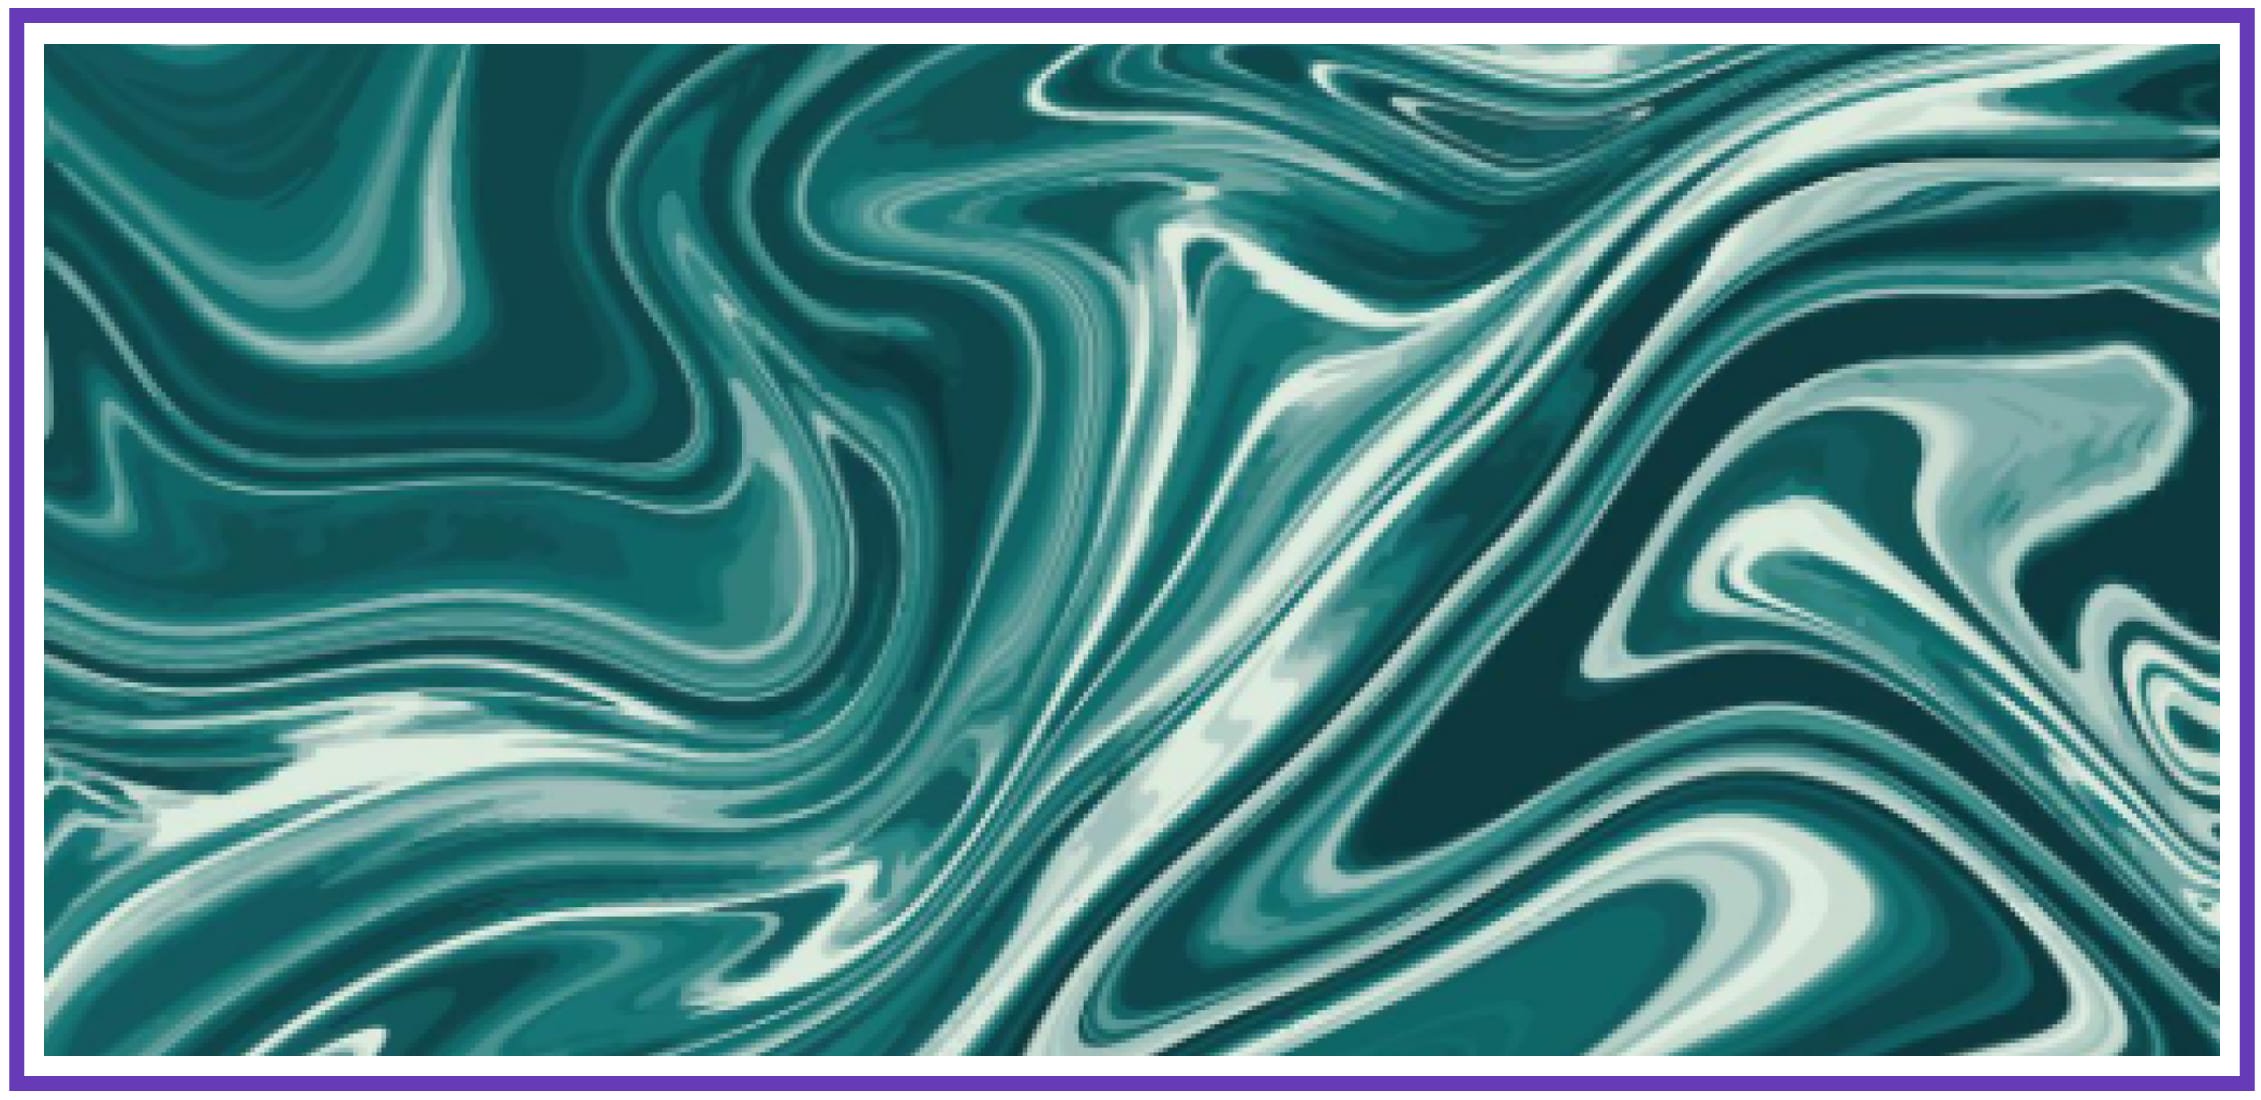 Liquid marble texture with colorful abstract background.